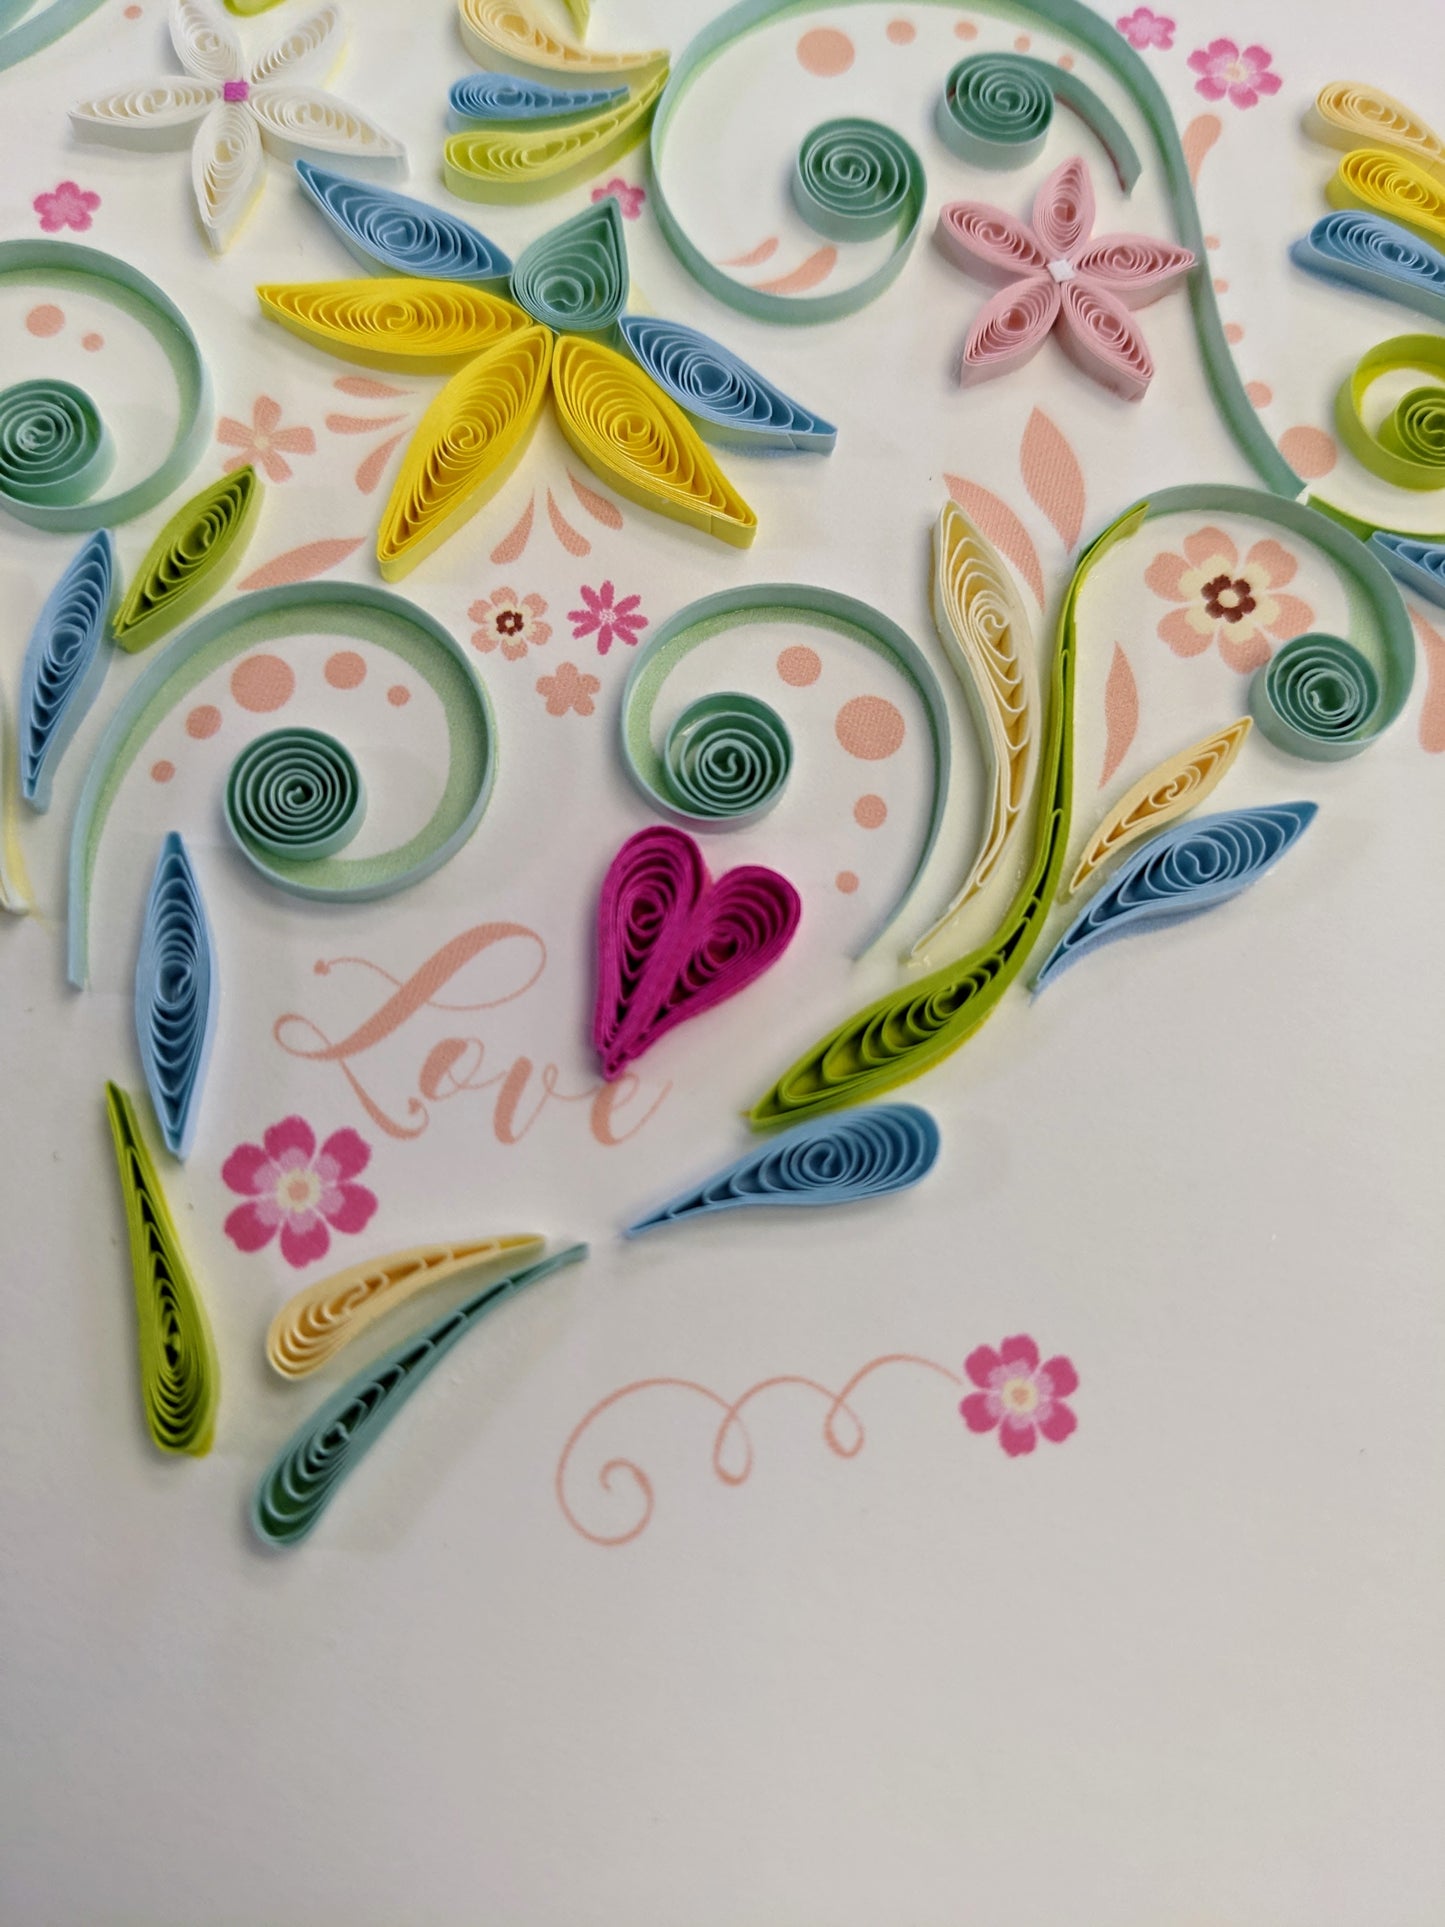 Love Floral Heart Quilling Card